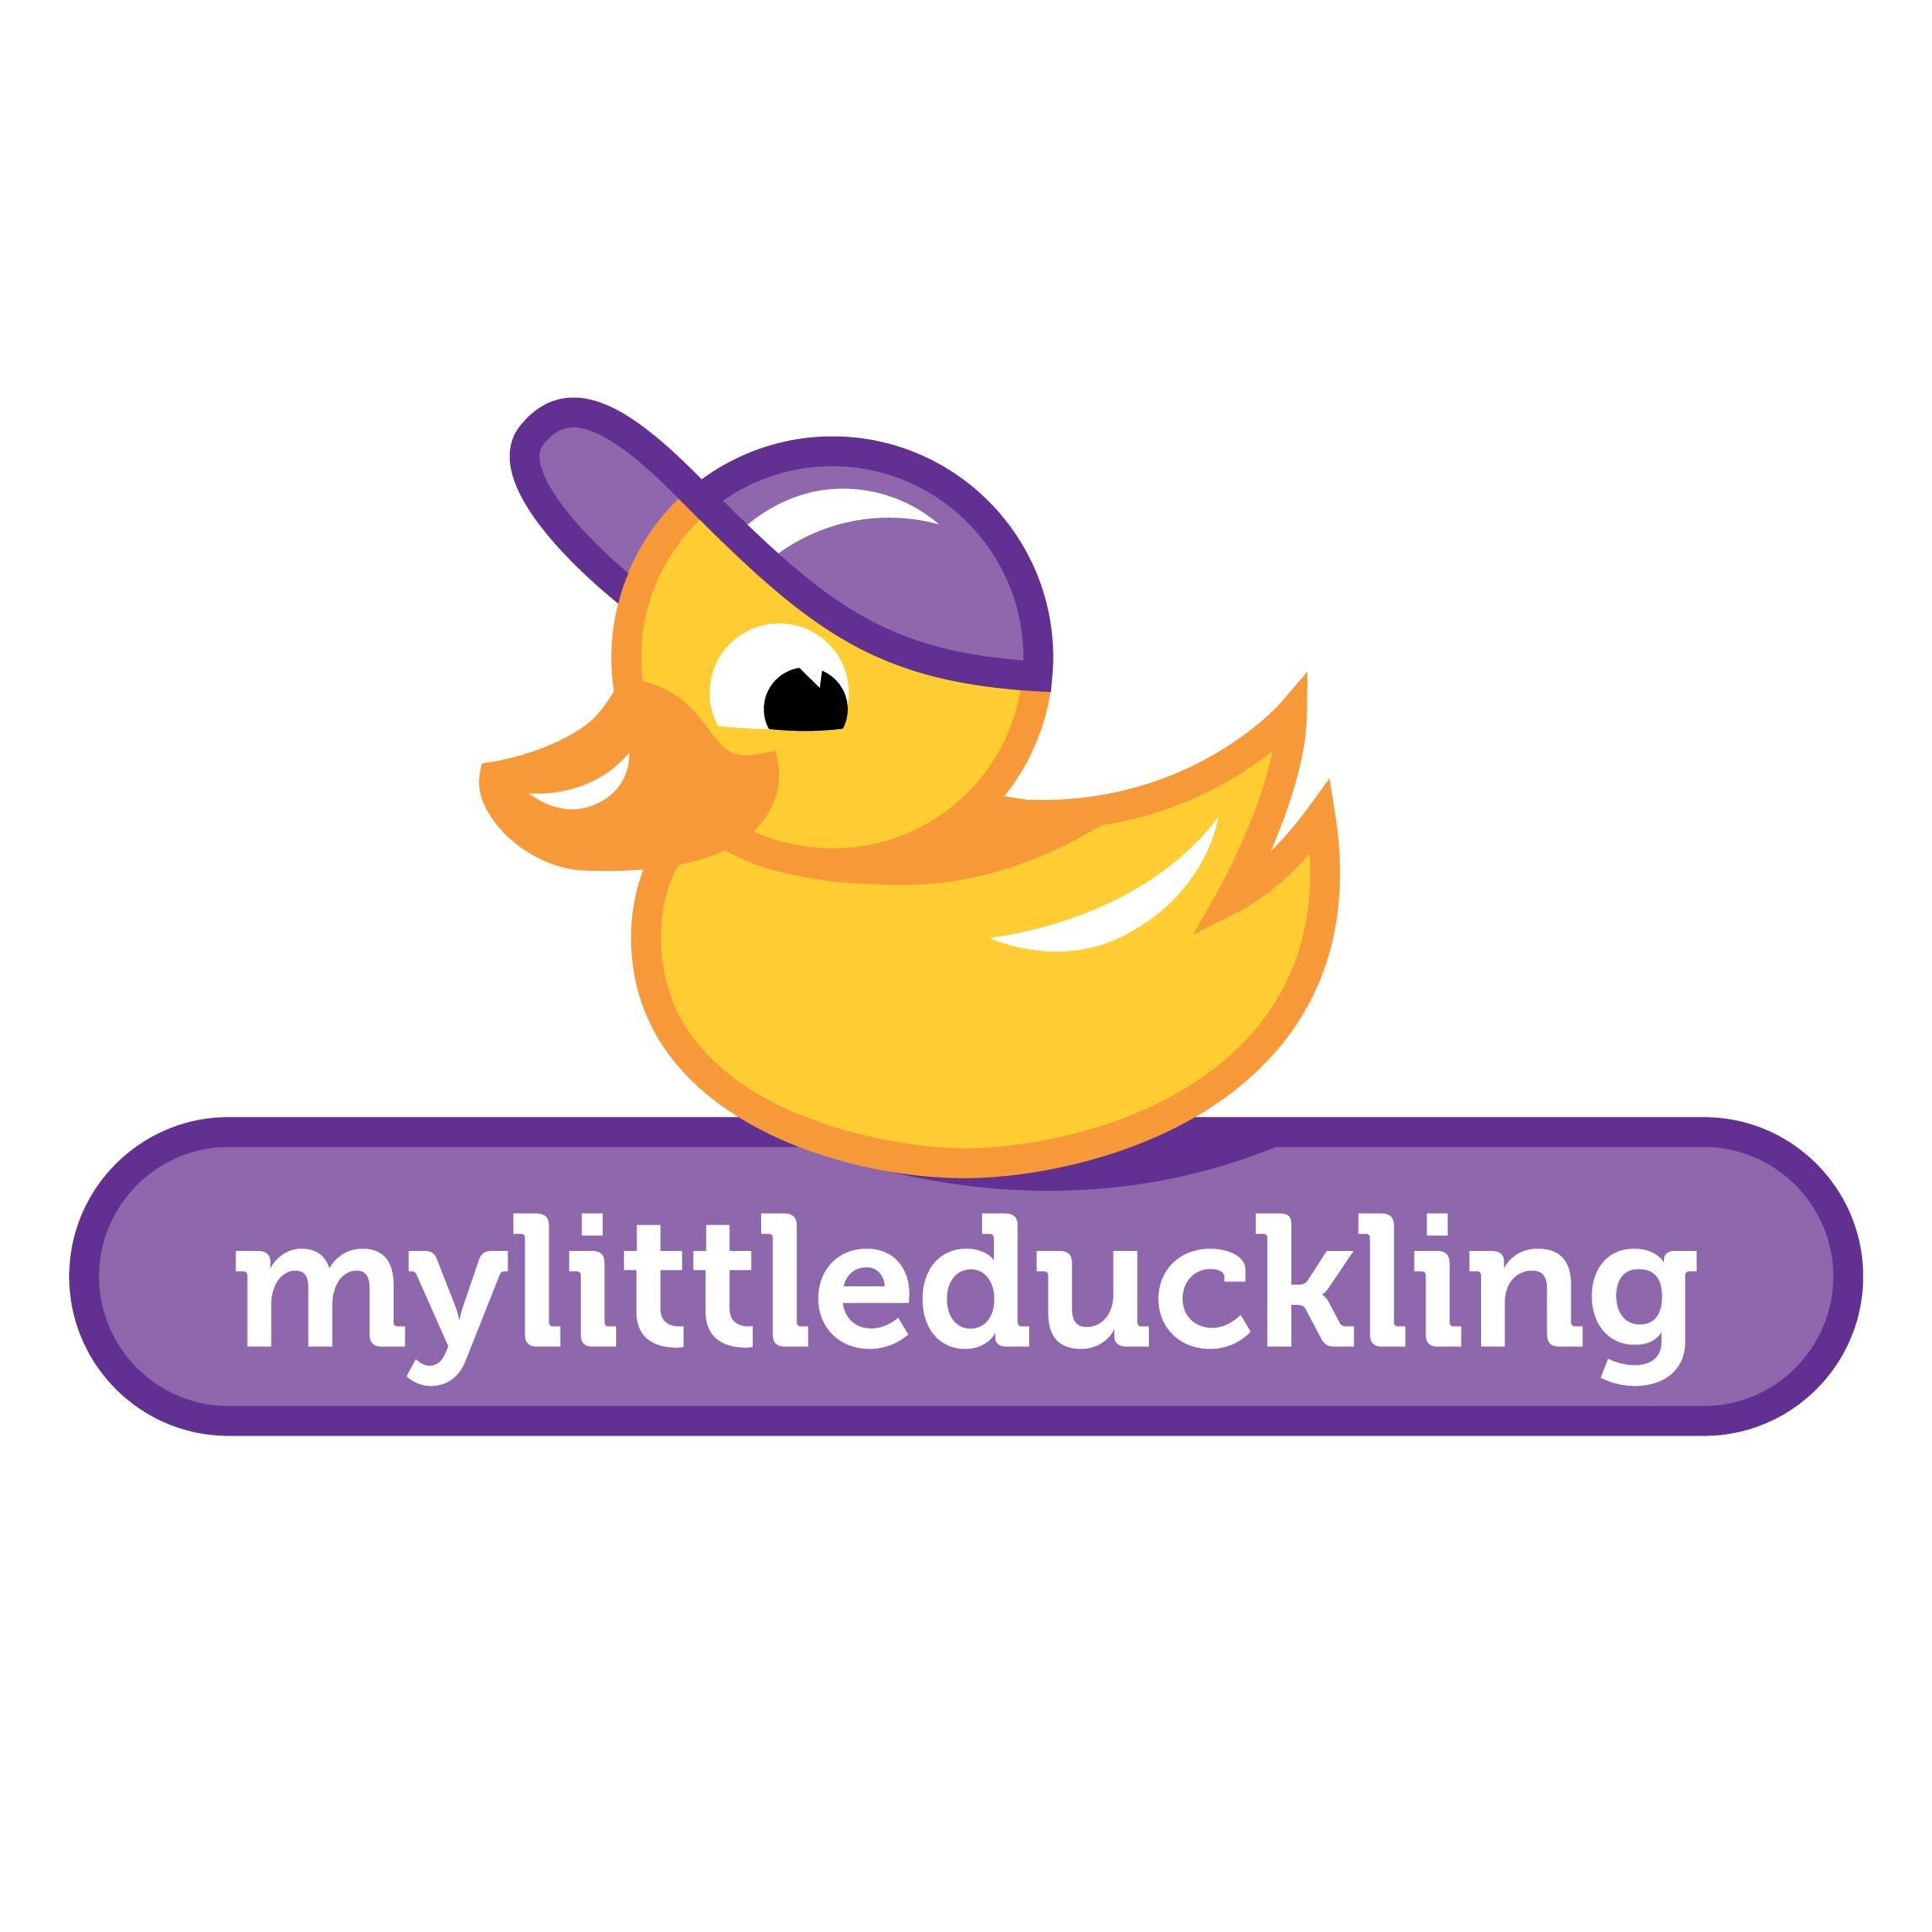 mylittleduckling brings imaginative hats for babies and toddlers. We hope that our hats take you and your ducklings on a journey of fun and discovery!